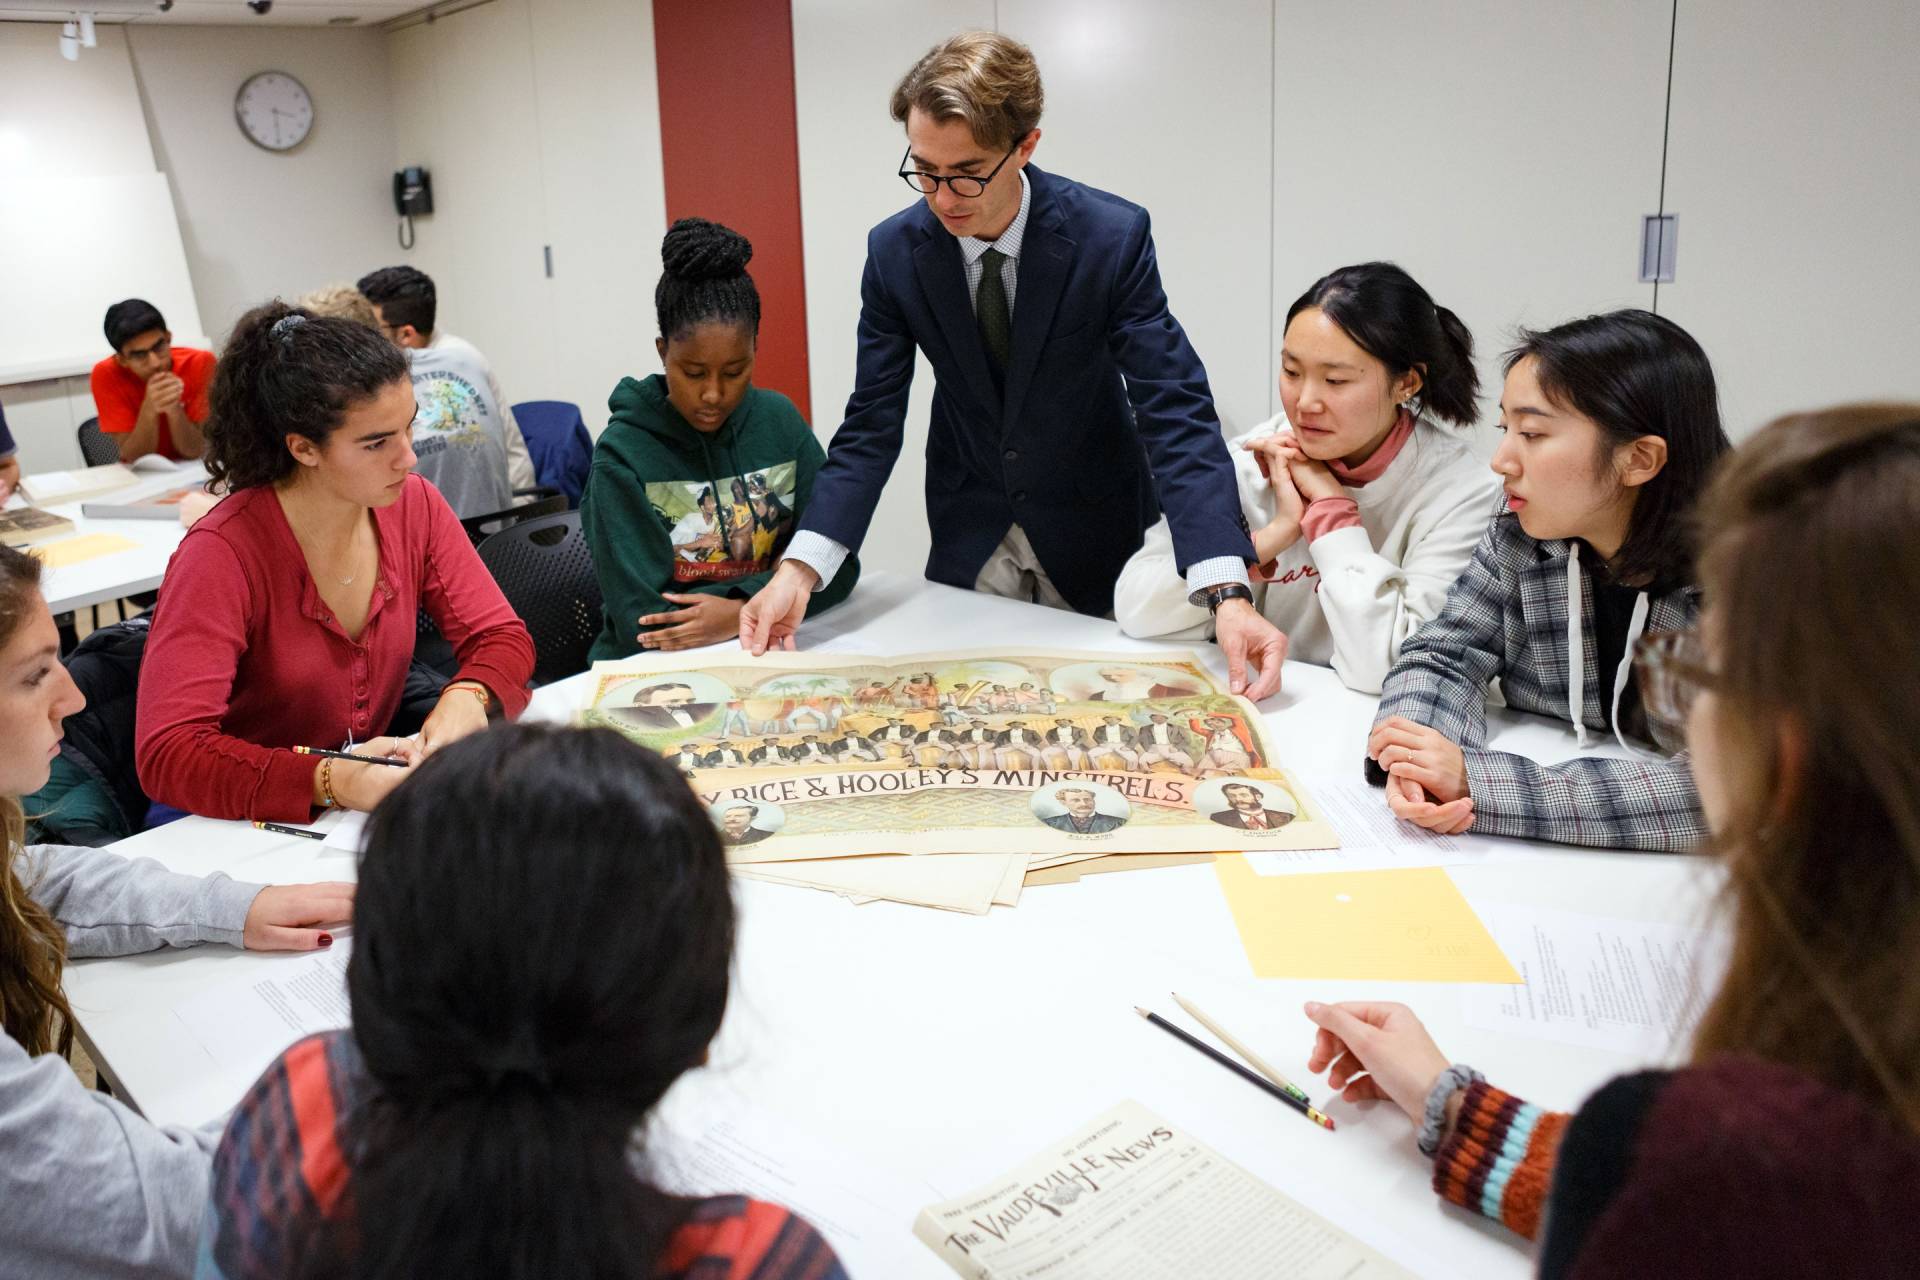 Professor and students look at materials from special collections